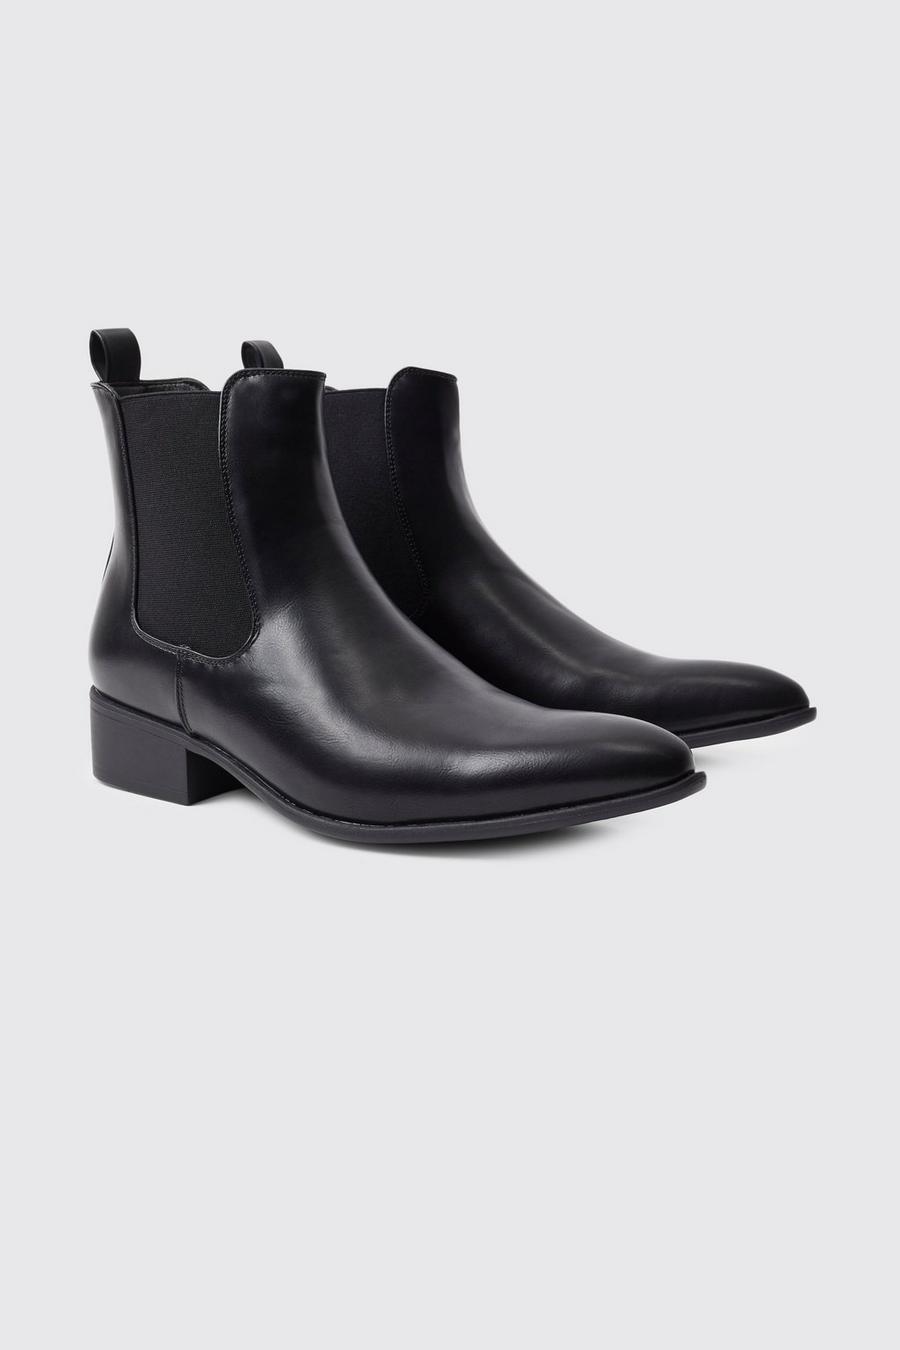 Black Wester Style Chelsea Boots